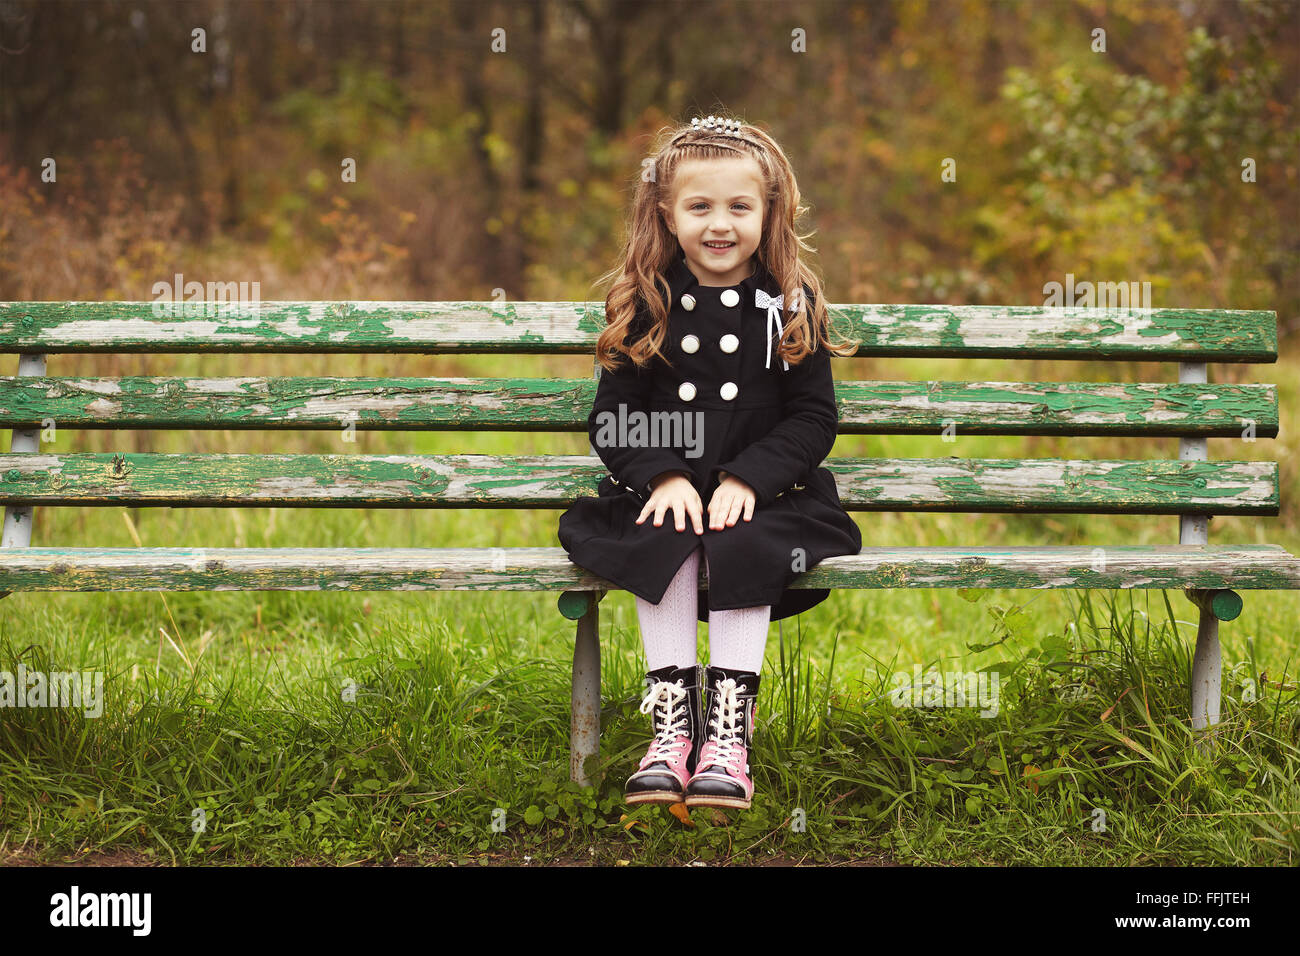 Cute little girl sitting on a bench Stock Photo